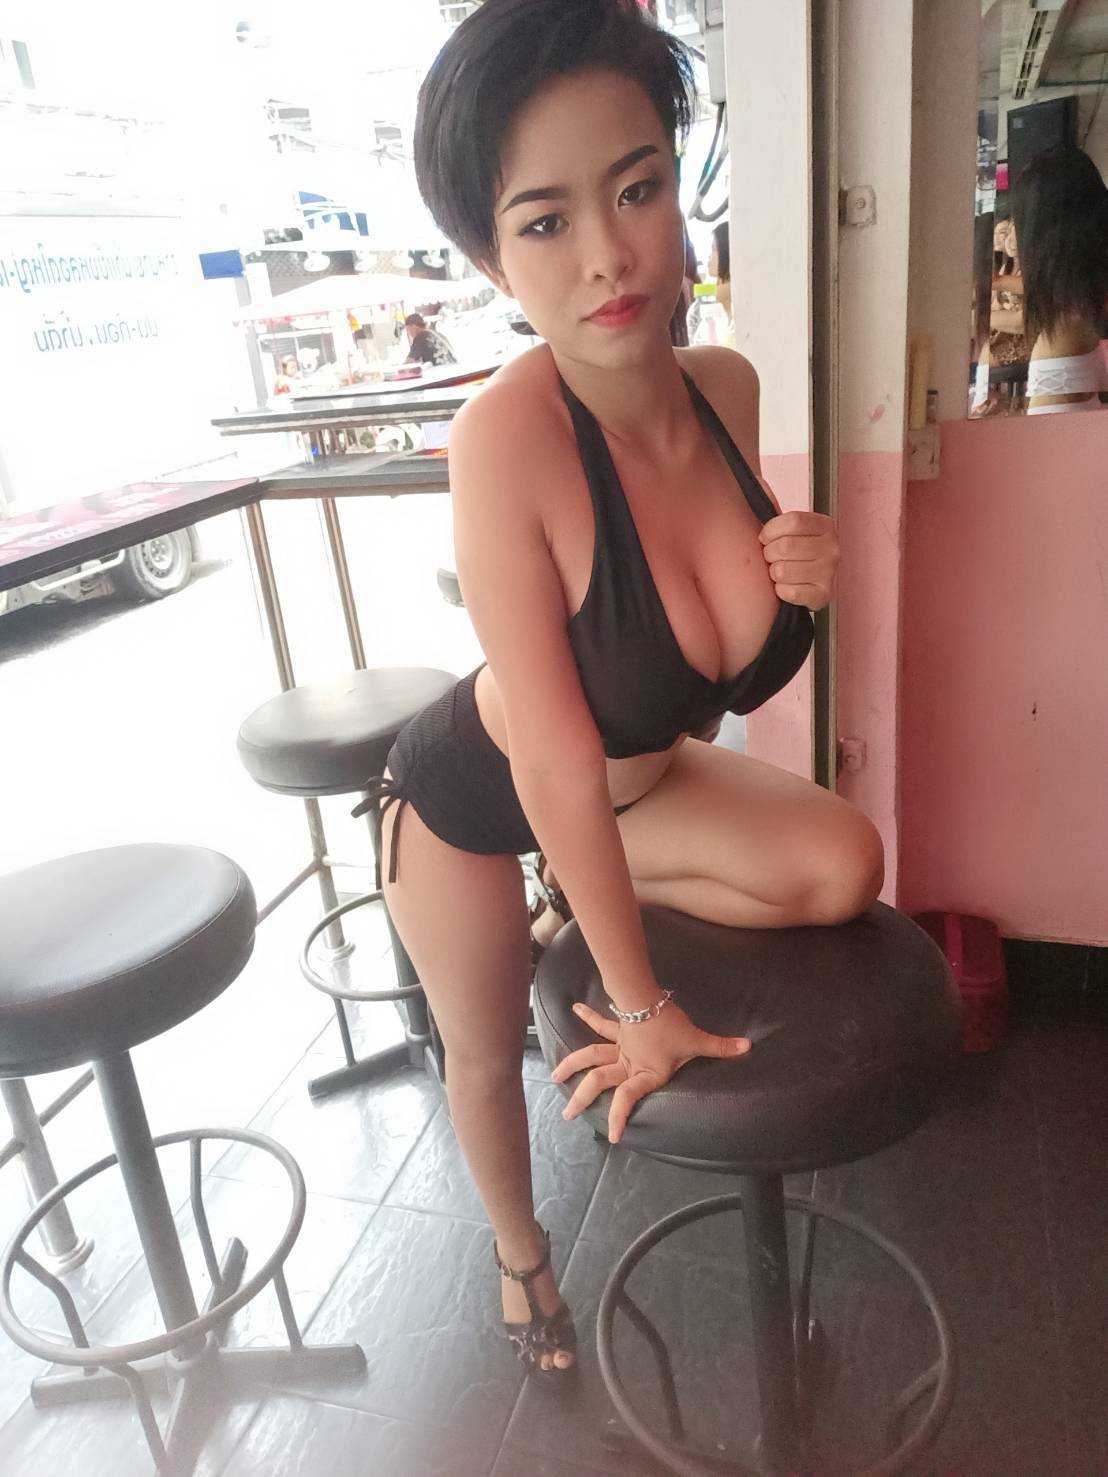 Bargirl From Pussy Club On Soi 6 Pattaya Oodleleux